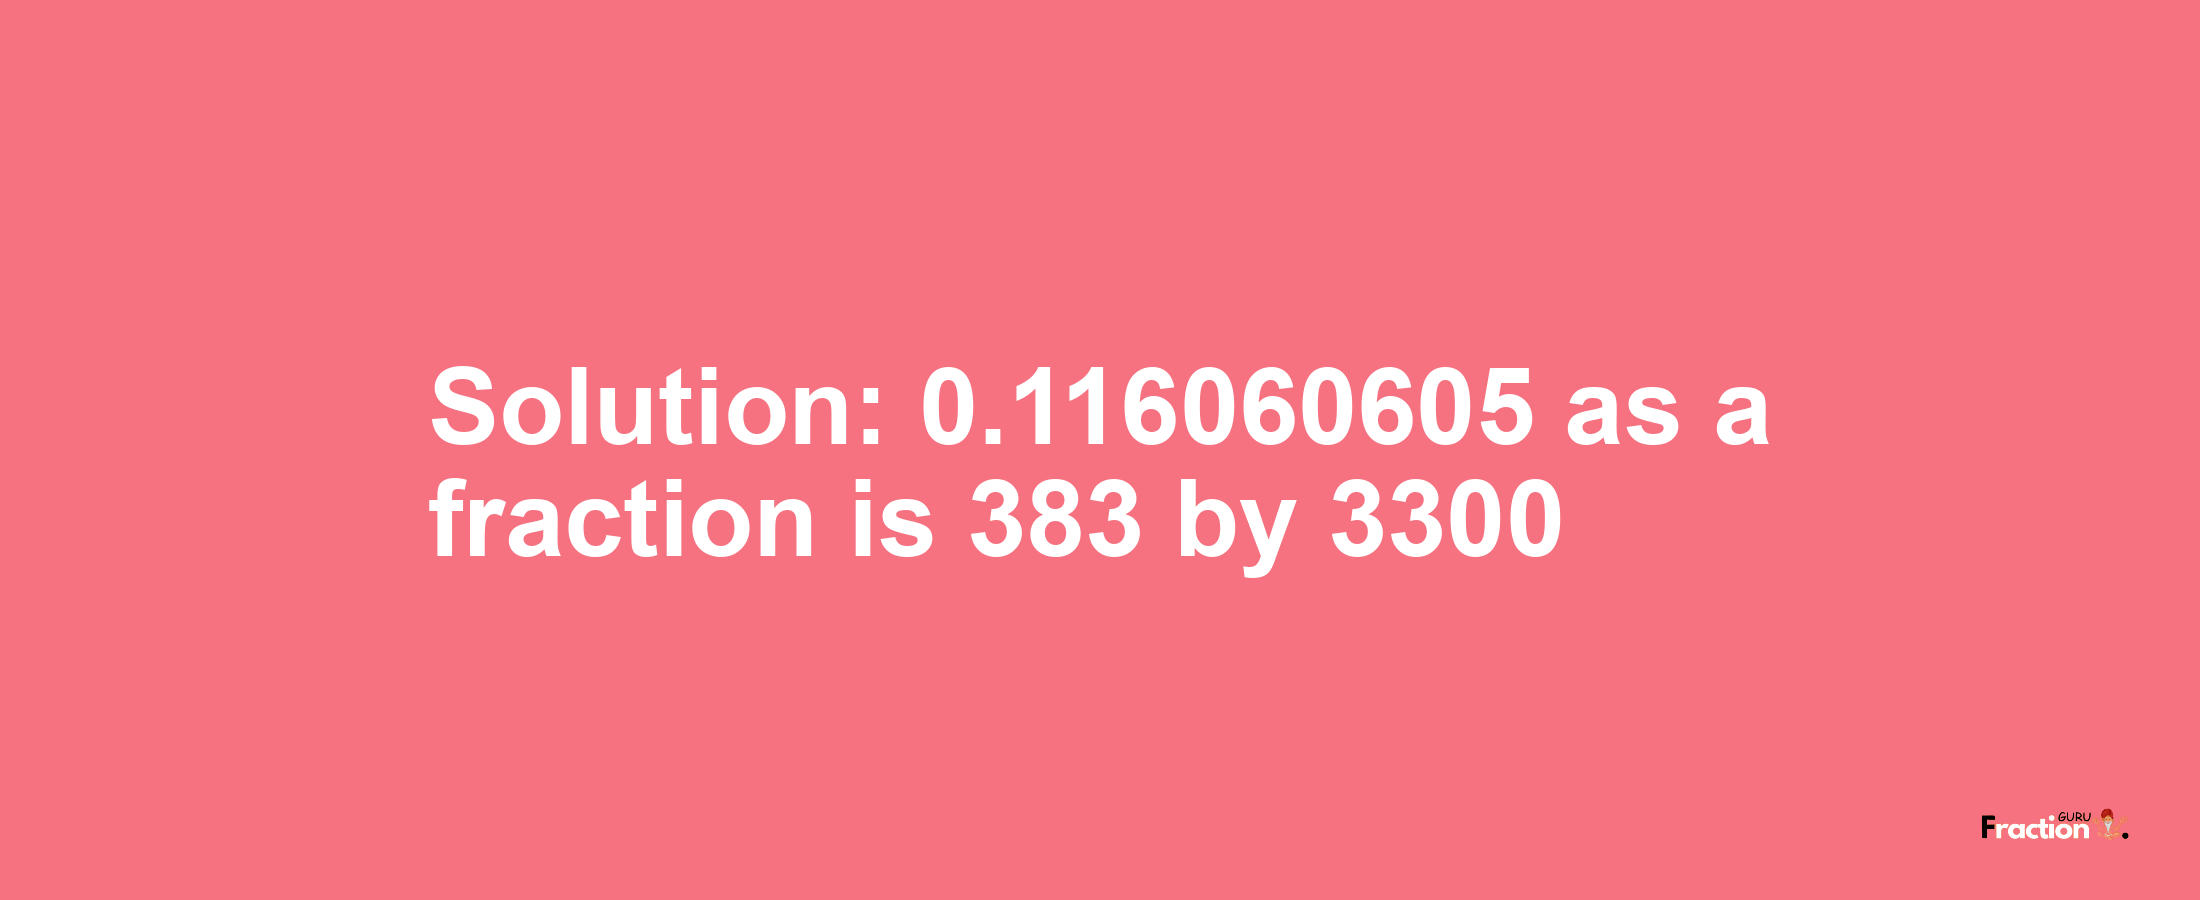 Solution:0.116060605 as a fraction is 383/3300